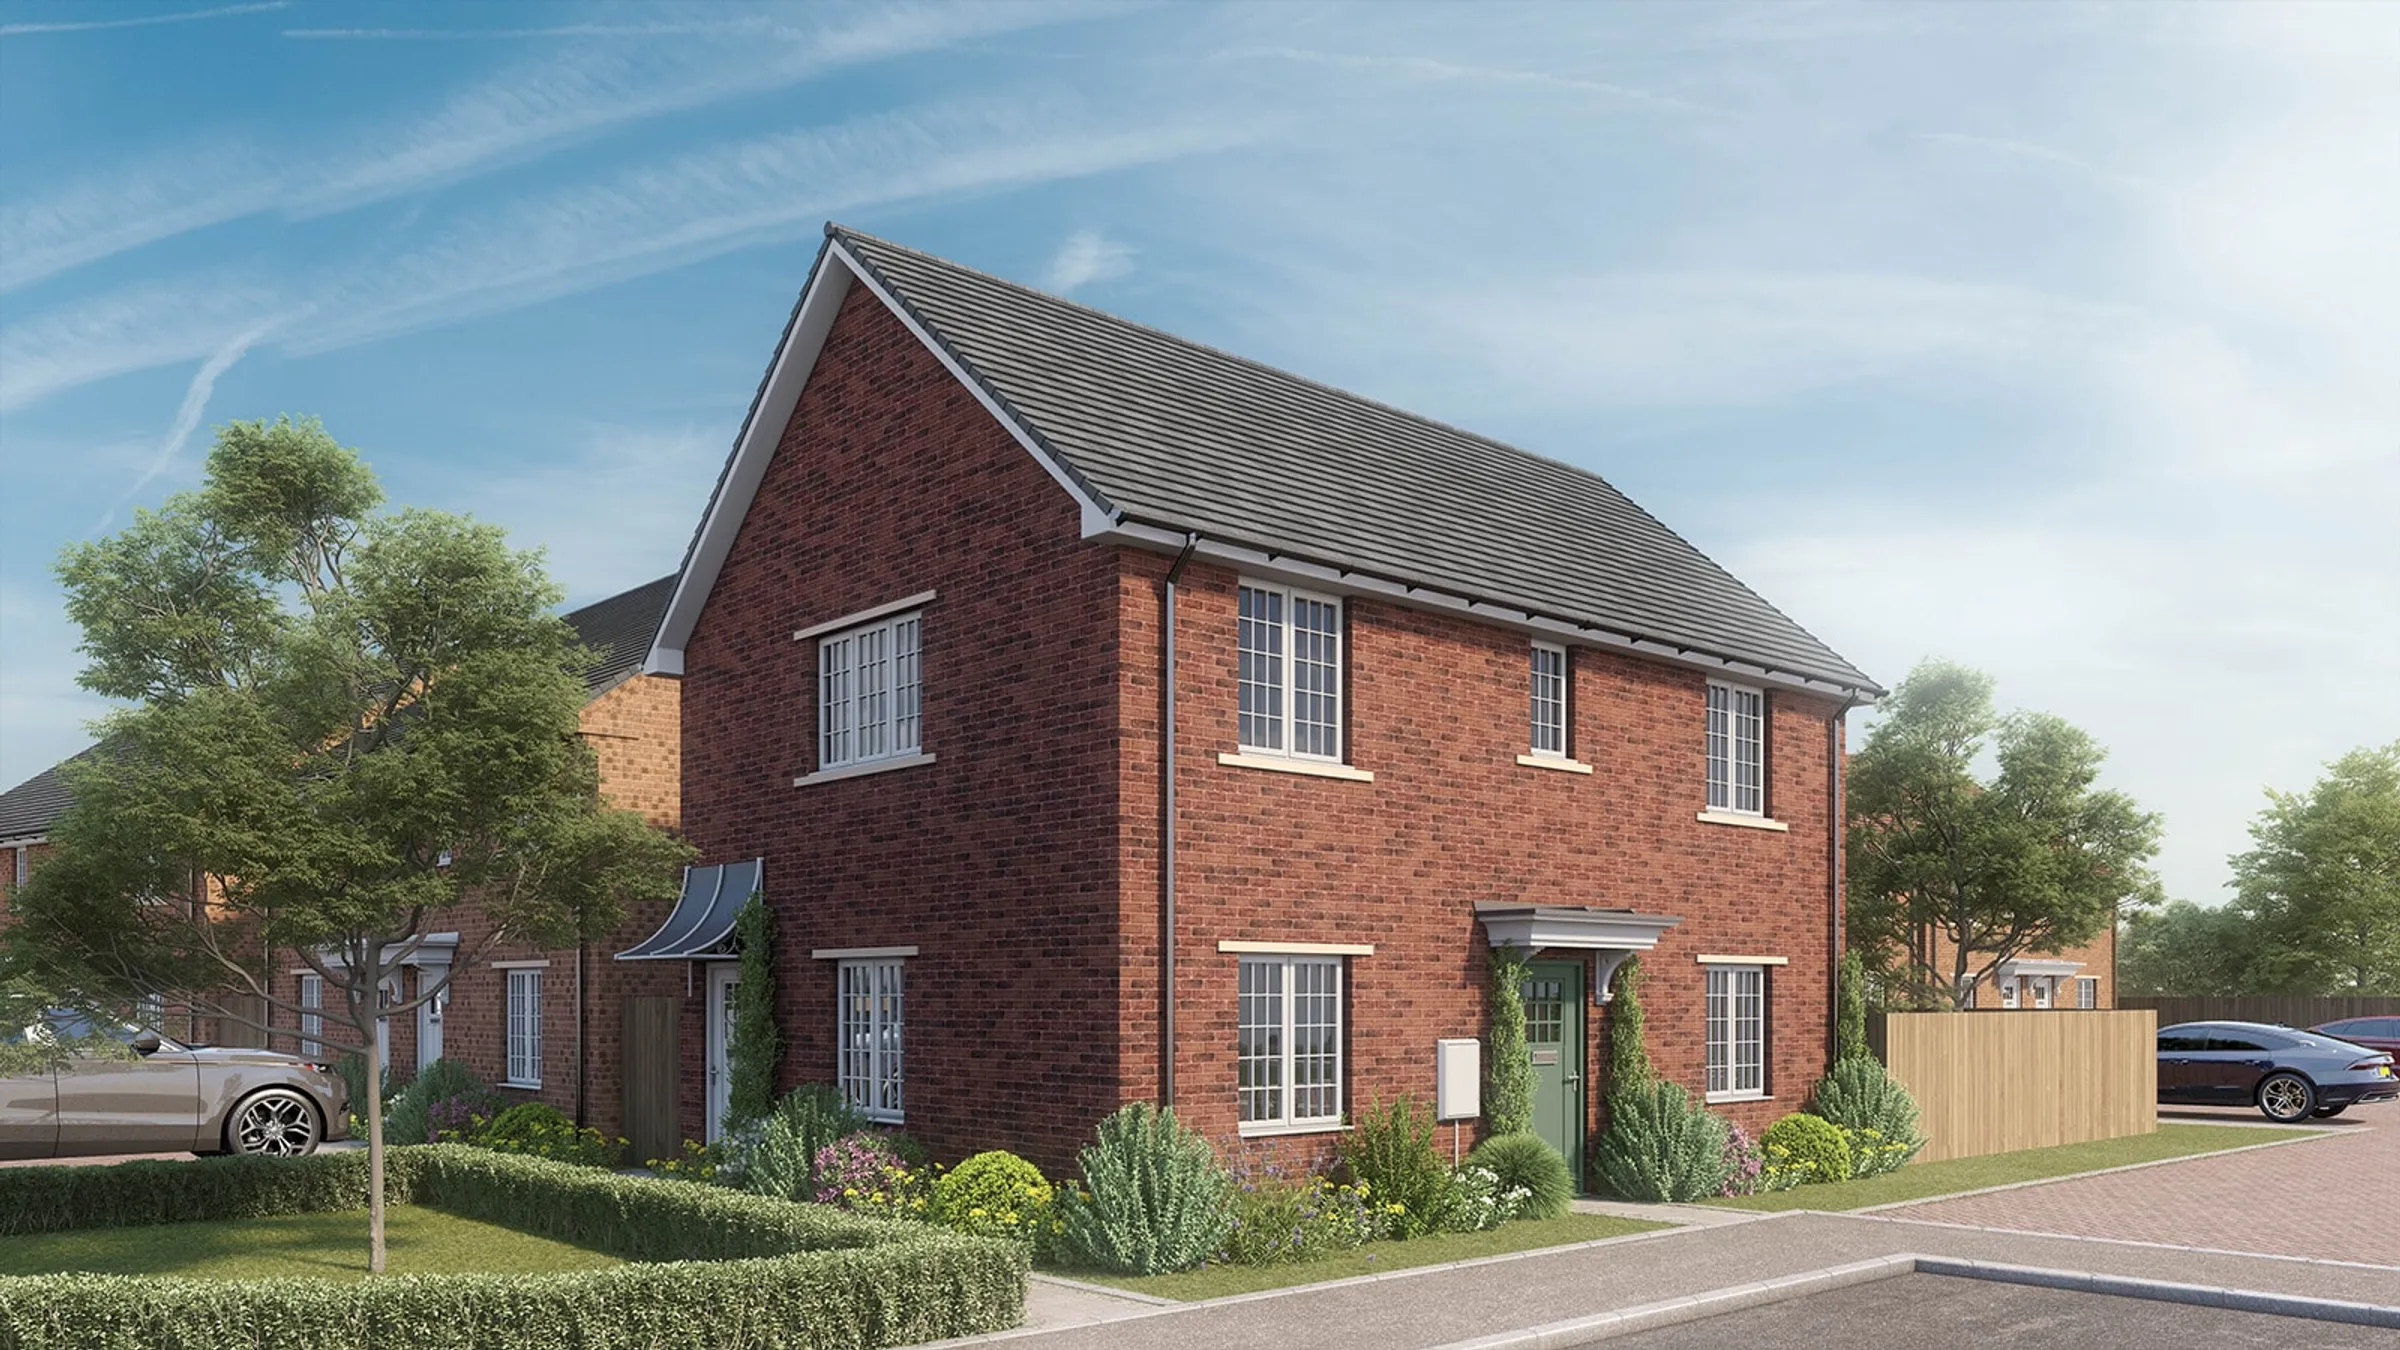 An image of Frankley Green by Latimer by Clarion Housing Group - available to purchase through Shared Ownership on Share to Buy!